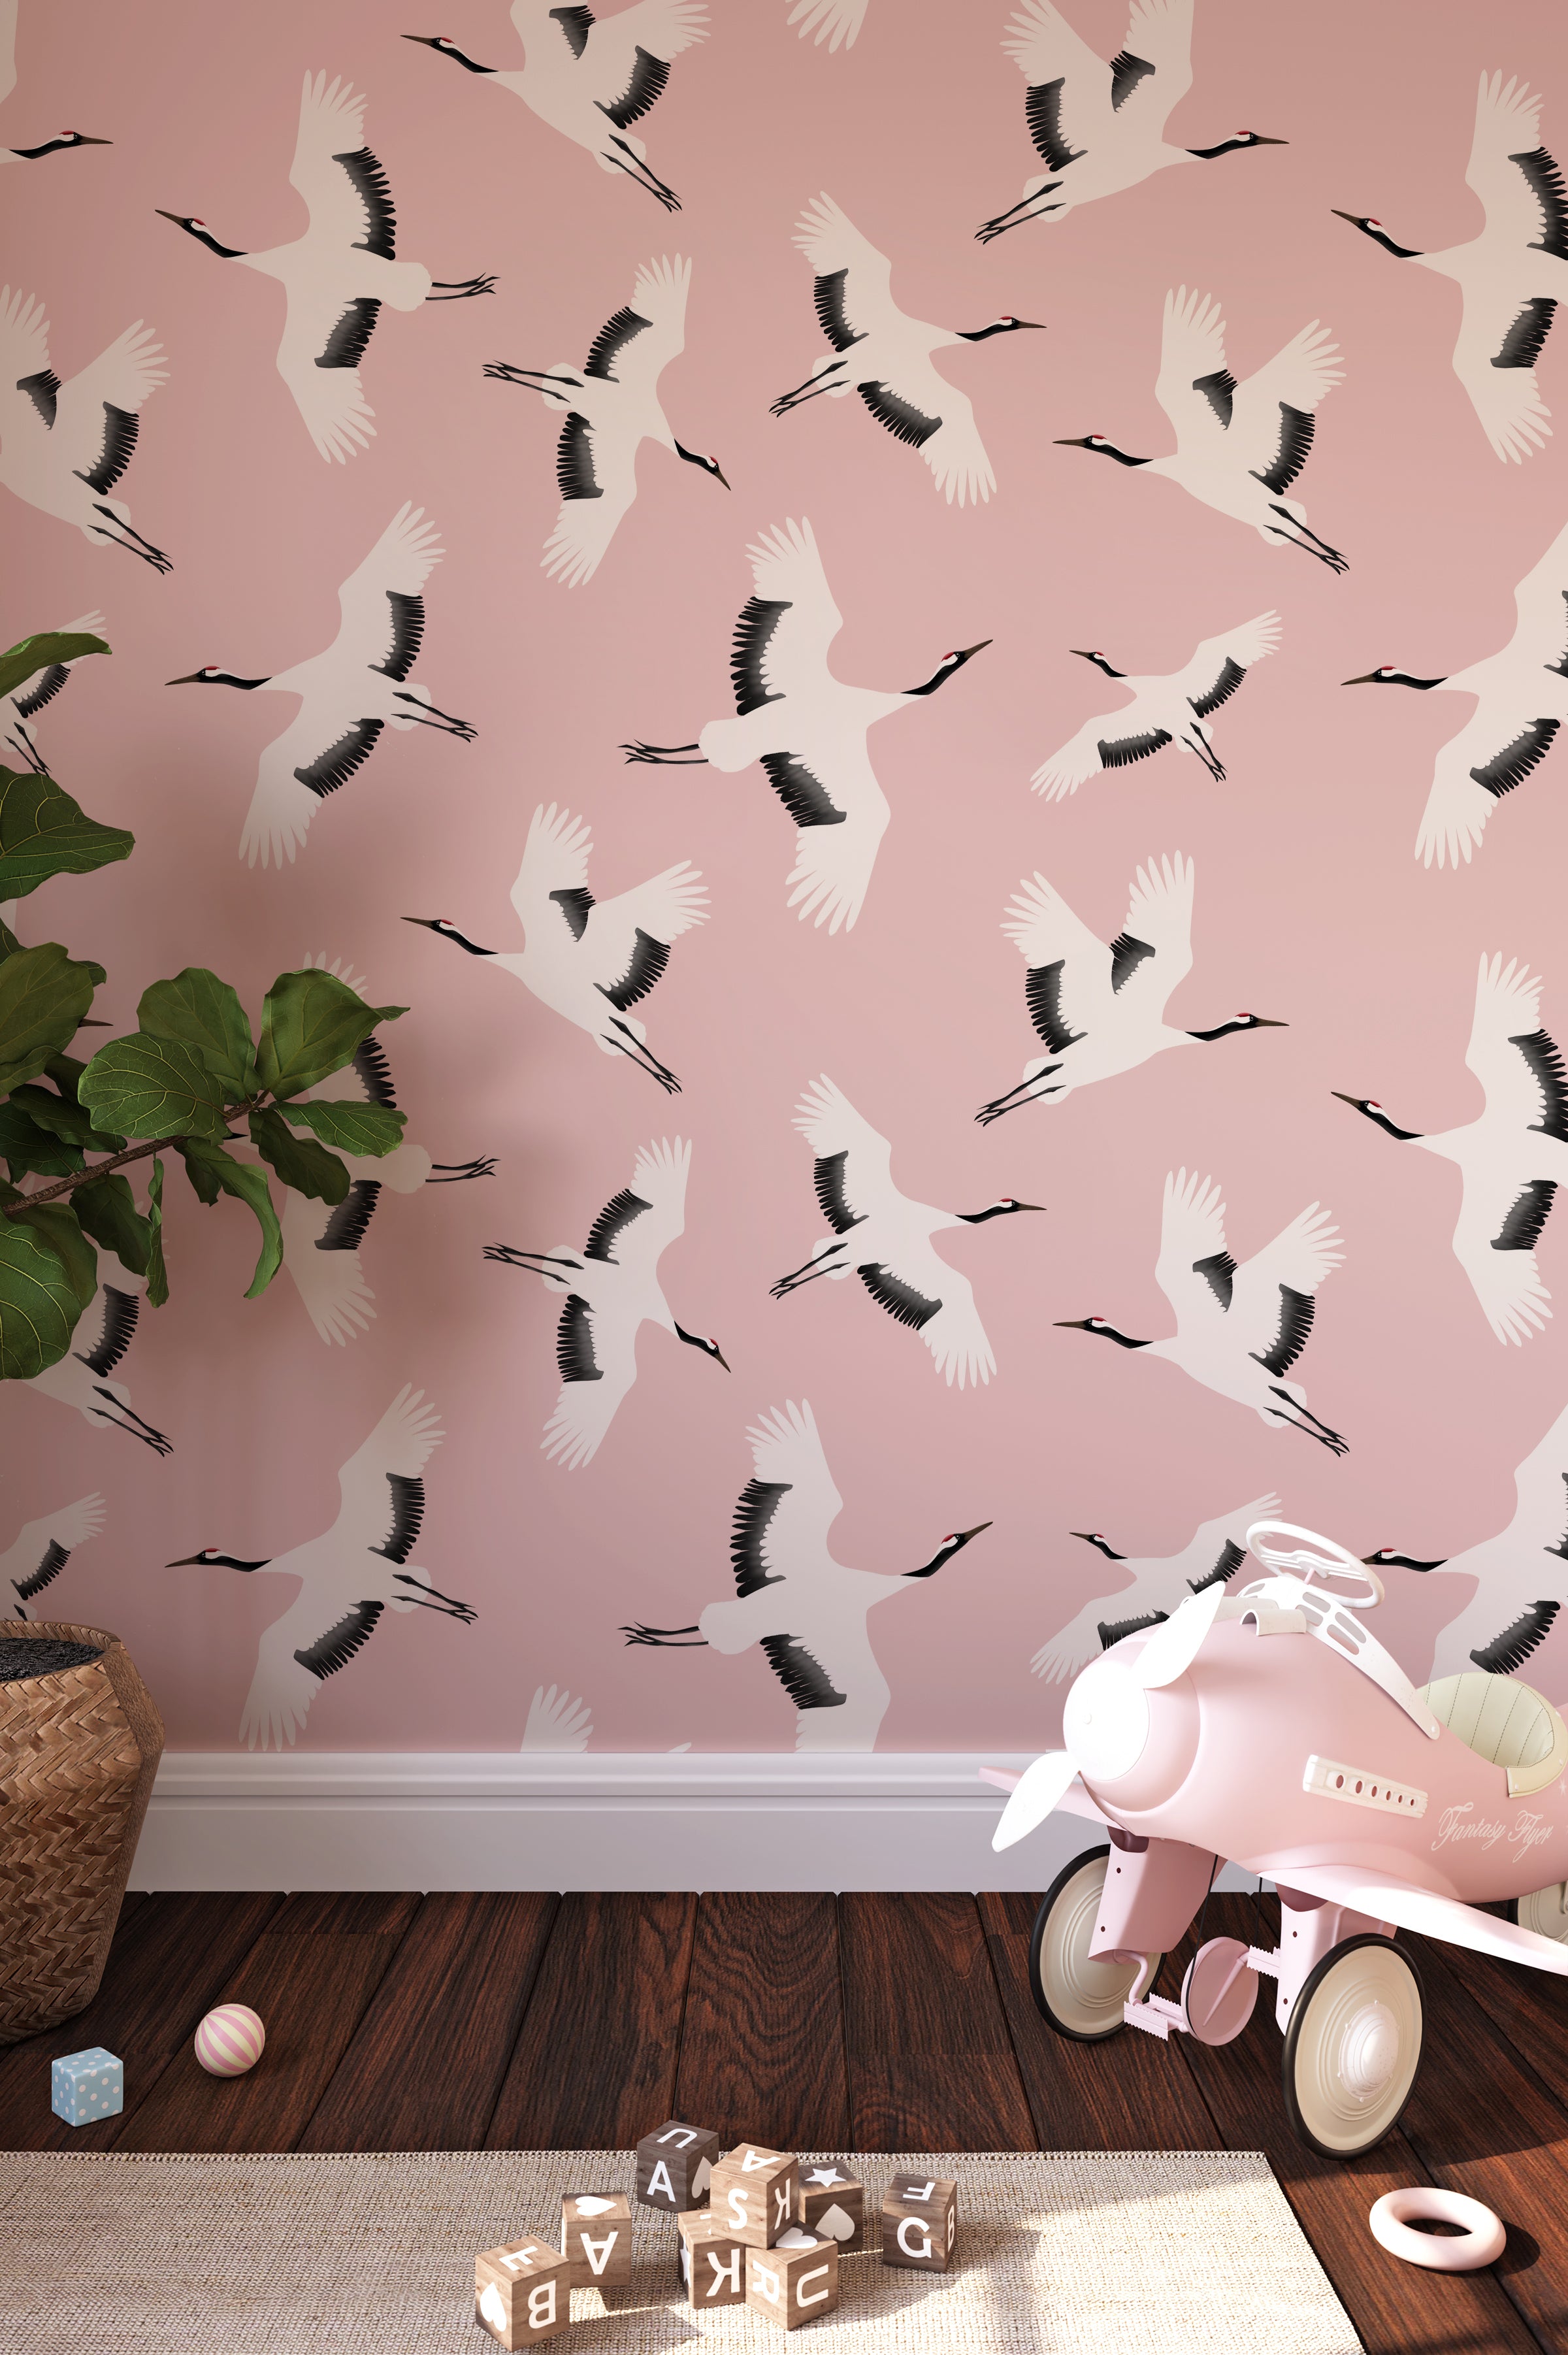 Elegant 'Kids Crane Wallpaper' in a children's playroom, featuring a pattern of white cranes in flight against a soft pink background, creating a serene and uplifting atmosphere